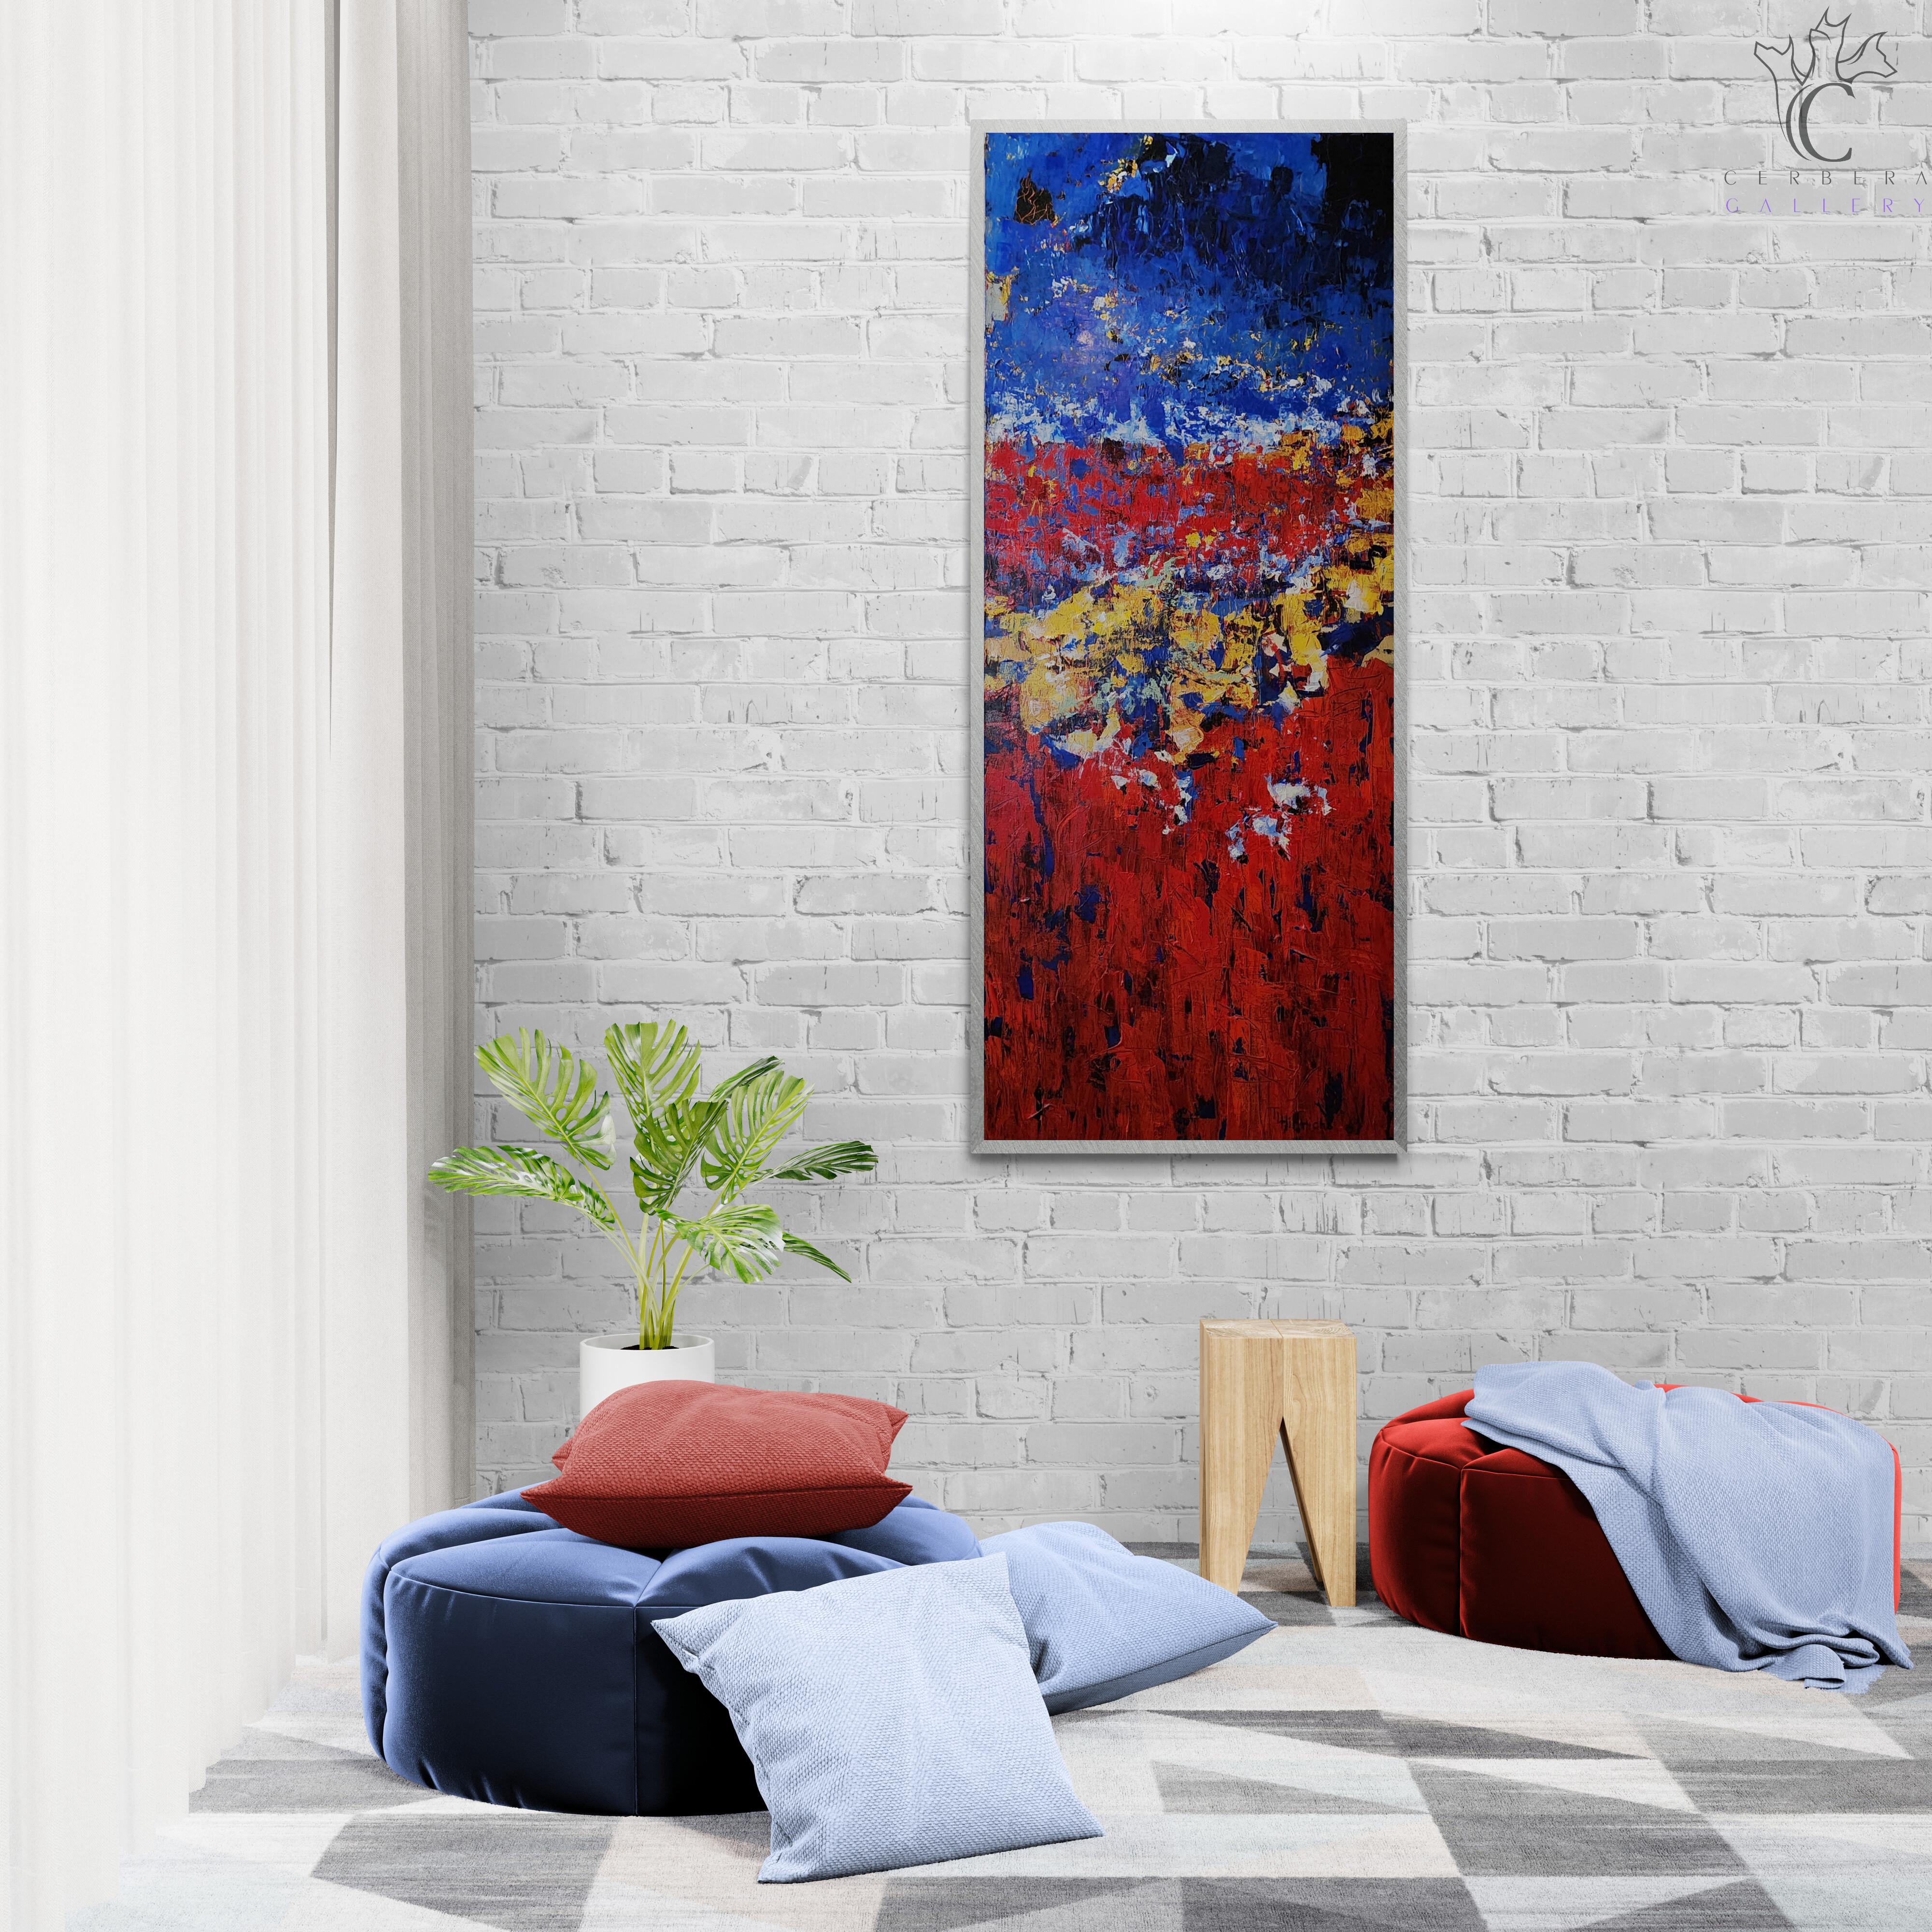 Desert Evening (Abstract, Acrylic, Gestural Abstraction, Red, Blue, Brown) - Painting by Ted Hinrichs